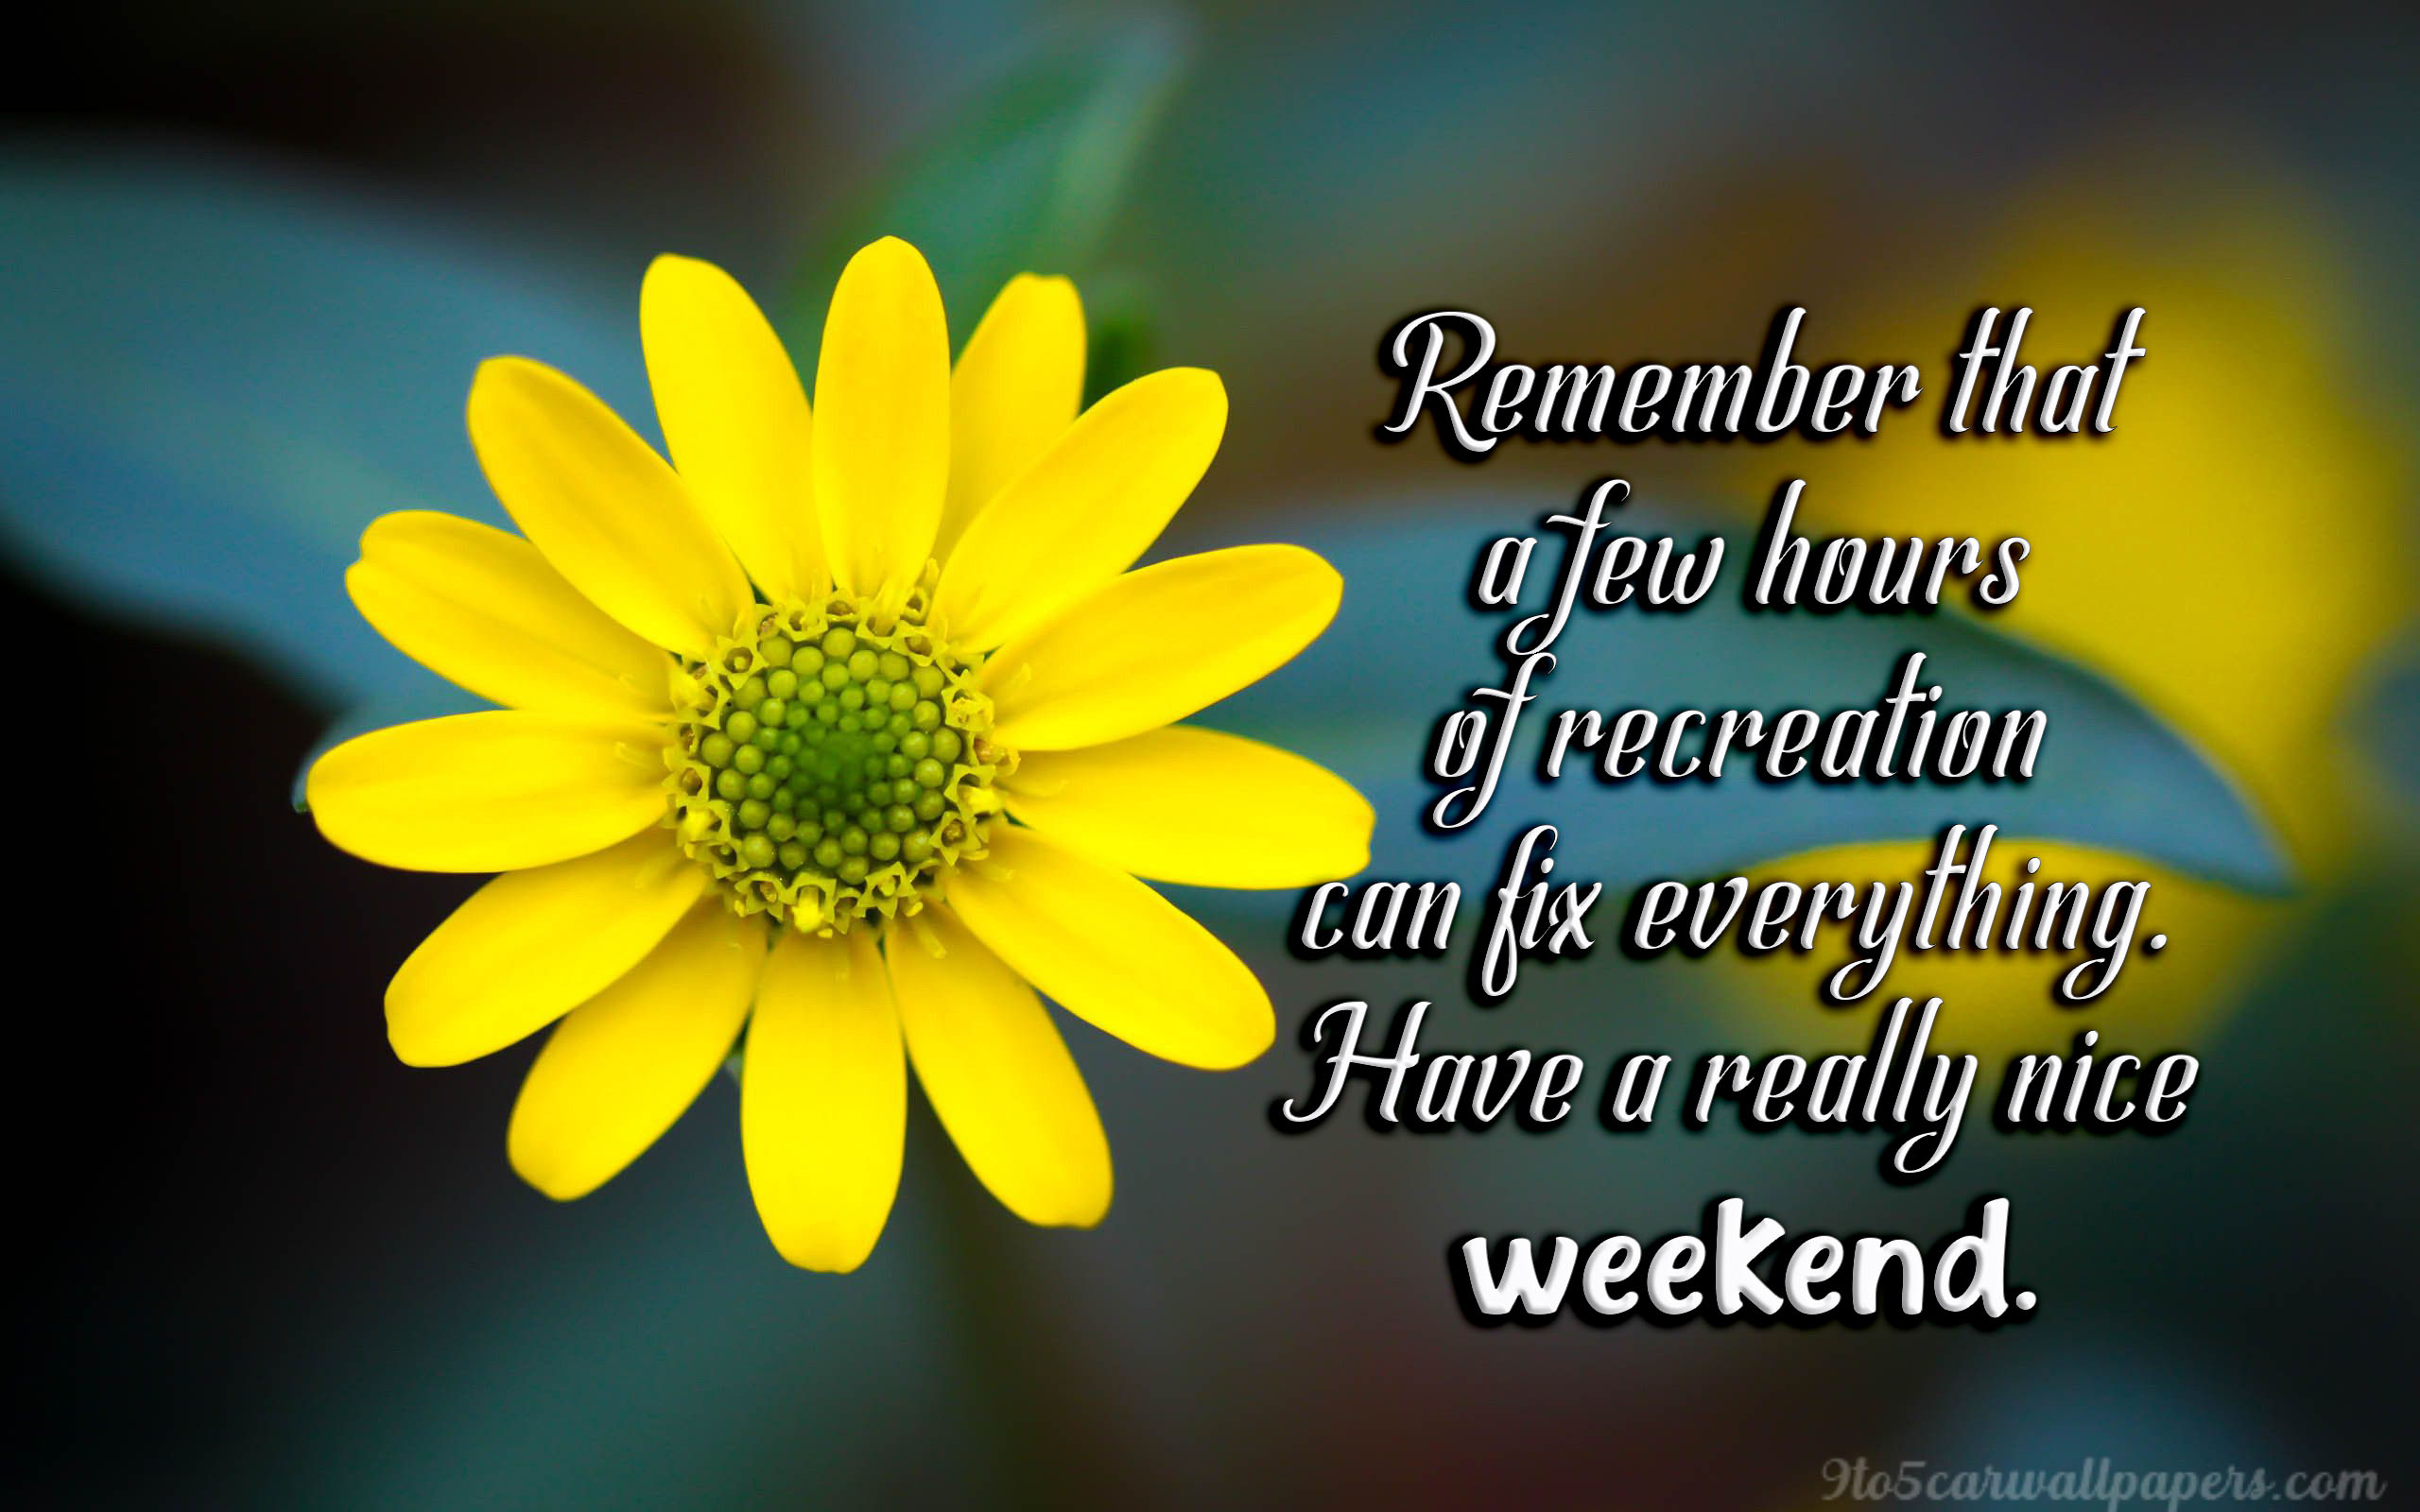 Download-happy-weekend-messages-wishes